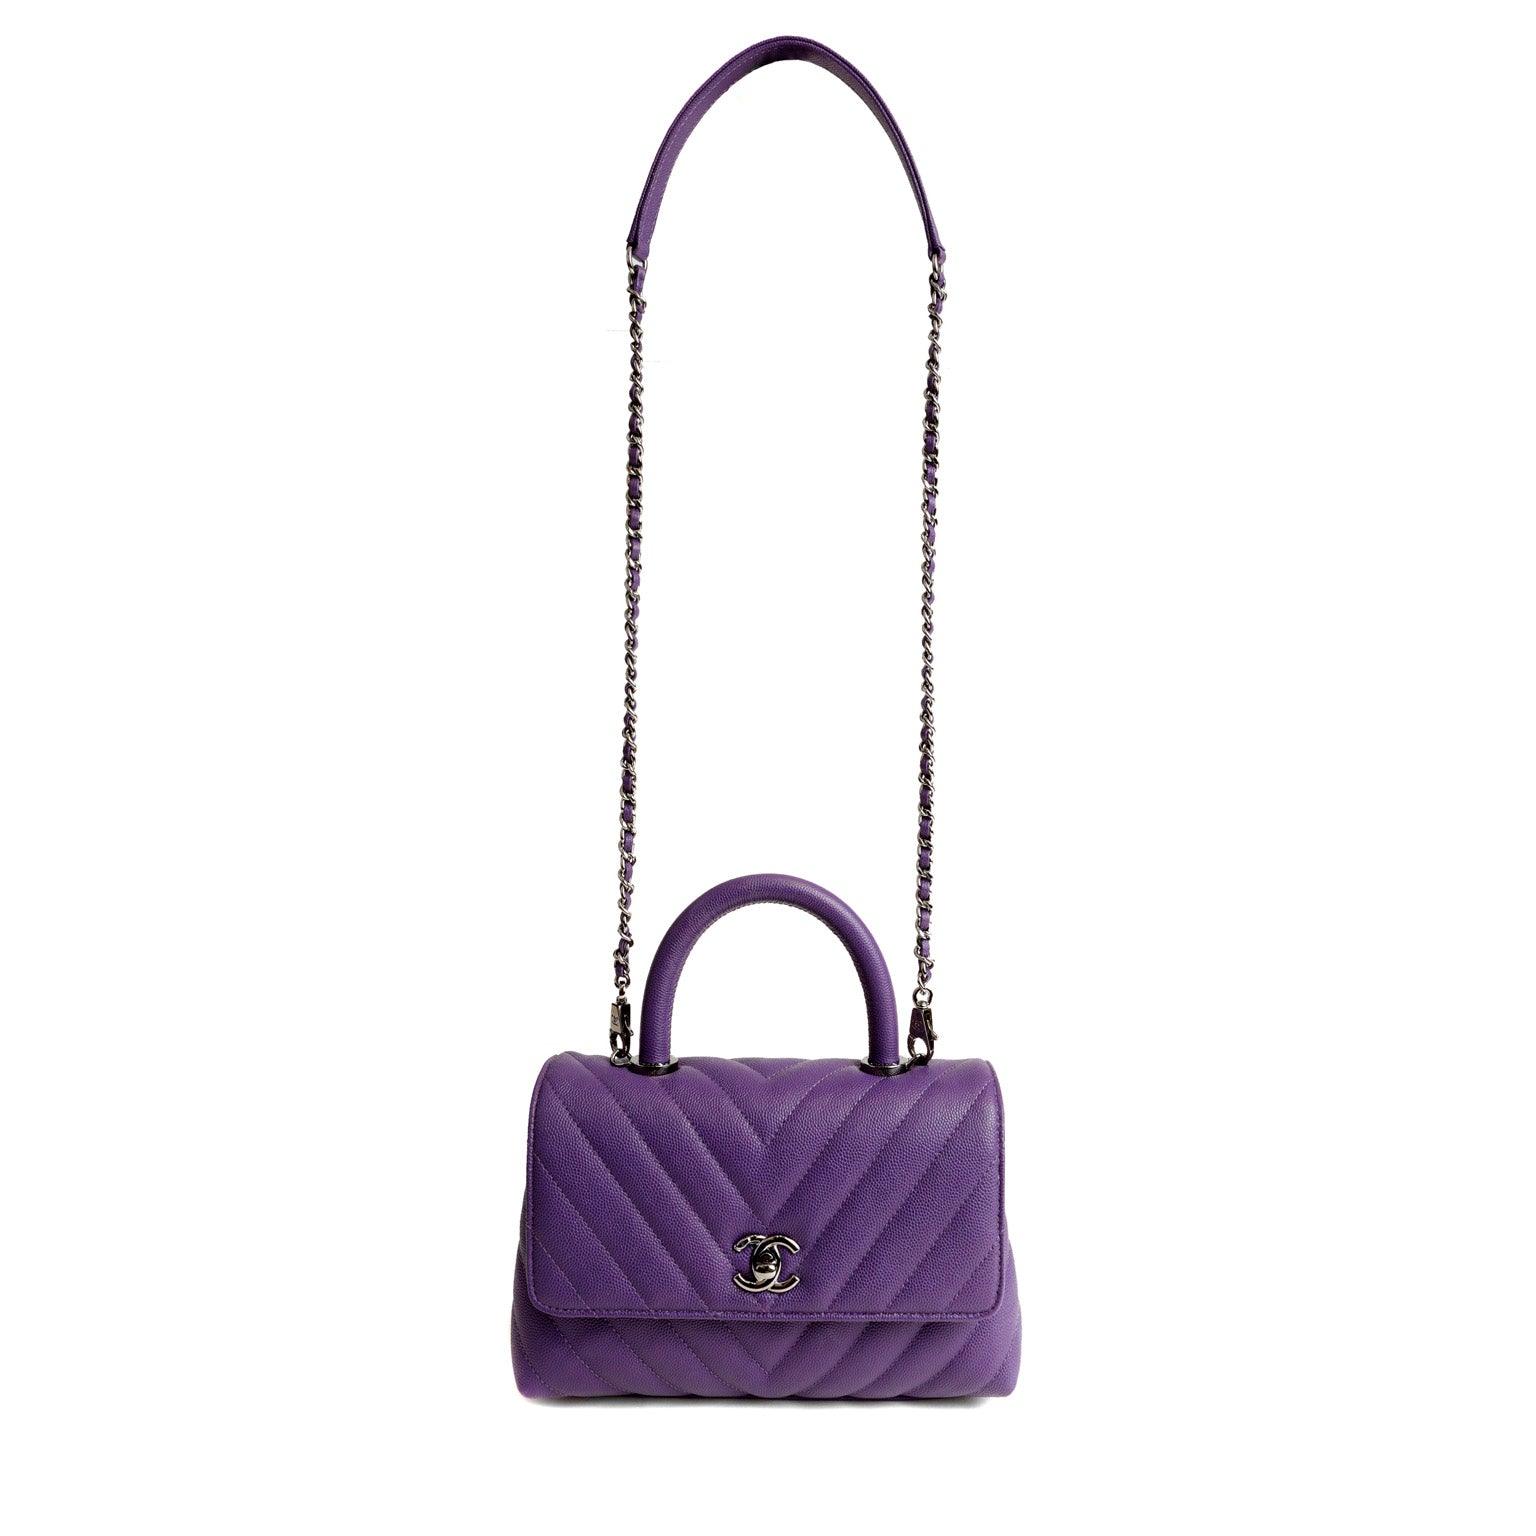 Get your hands on the stylish and chic Chanel Purple Caviar